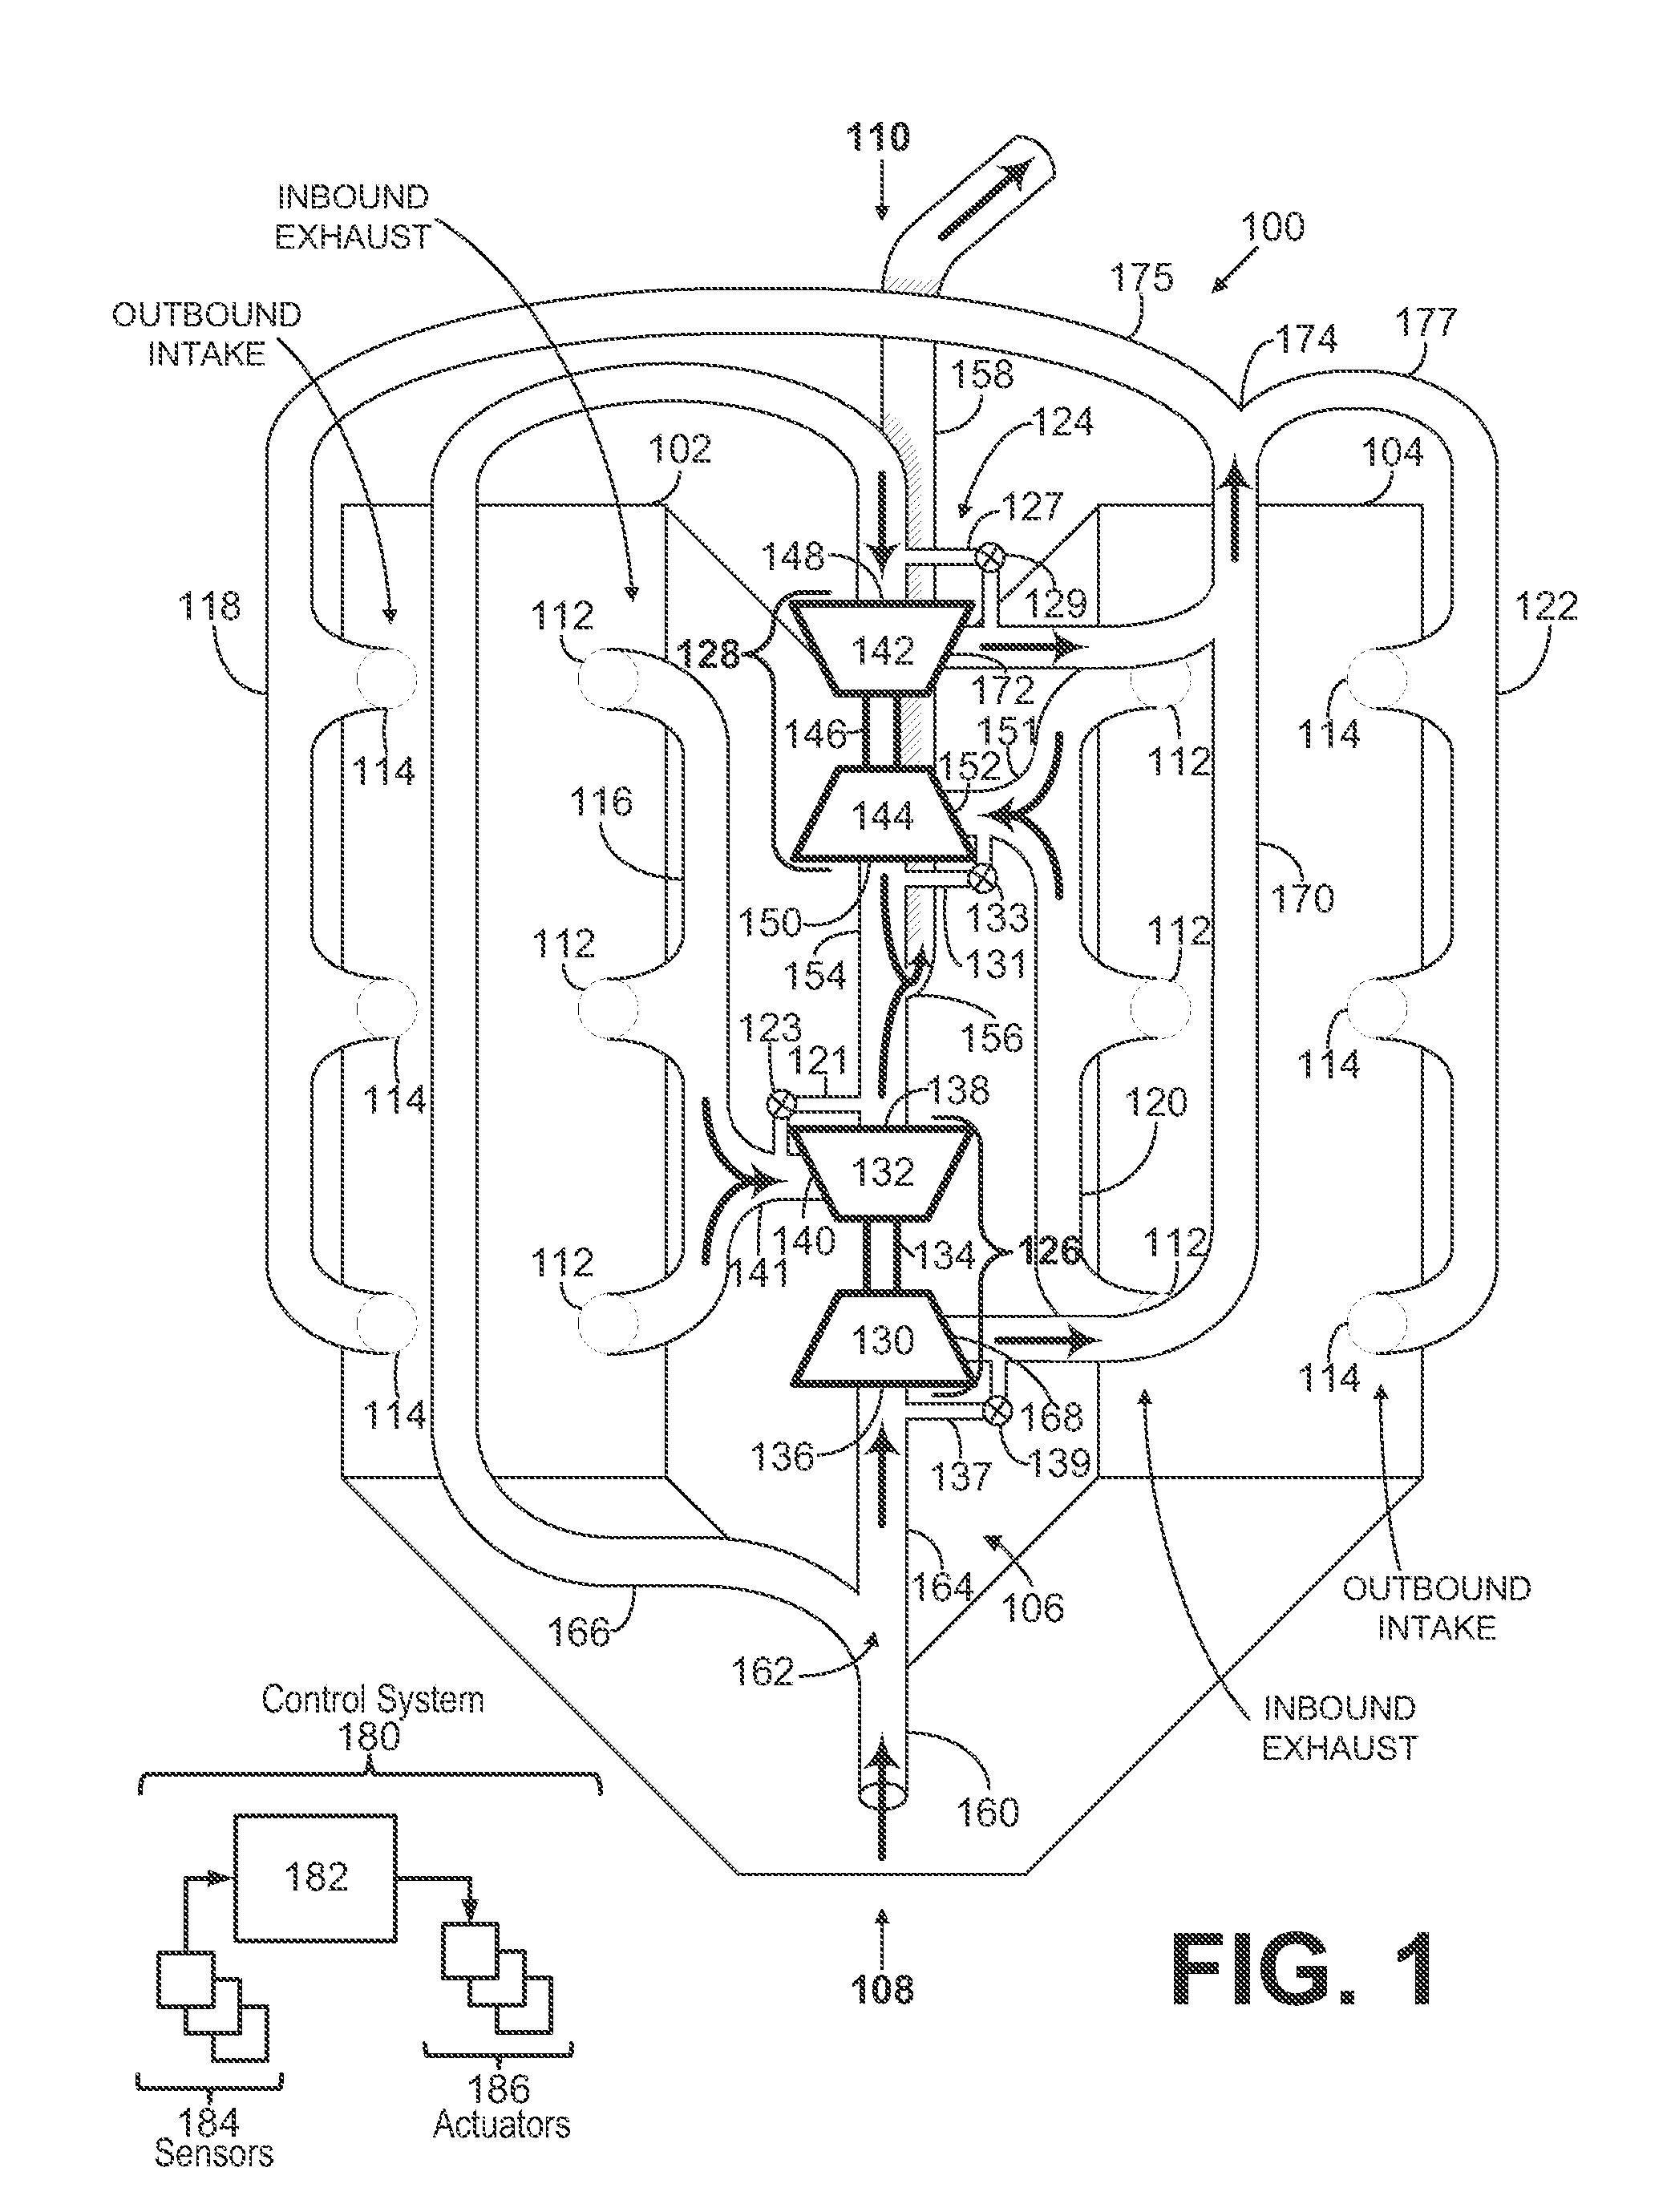 Central turbocharger mounting configuration for a twin-turbo engine